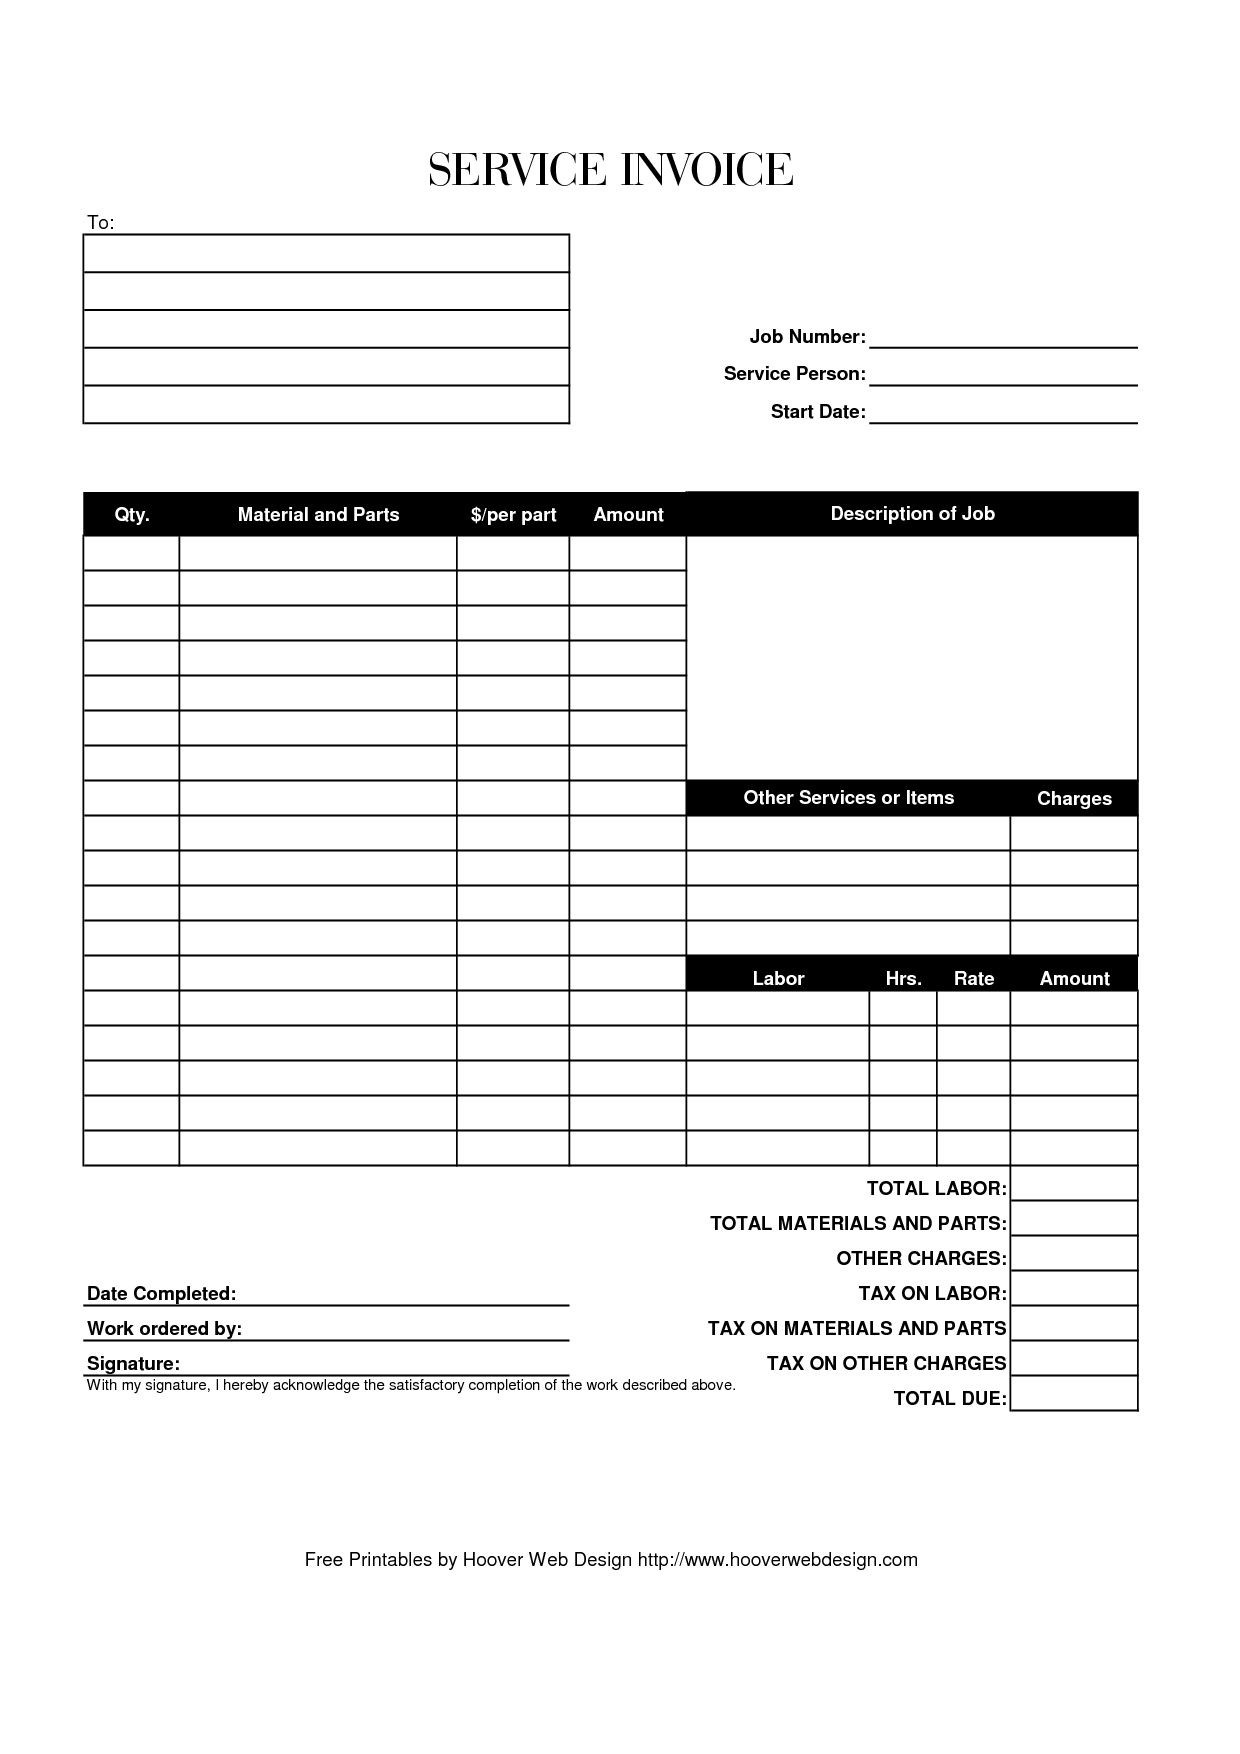 Free Printable Invoice Template New Free Printable Invoice Template - Aynax Com Free Printable Invoice